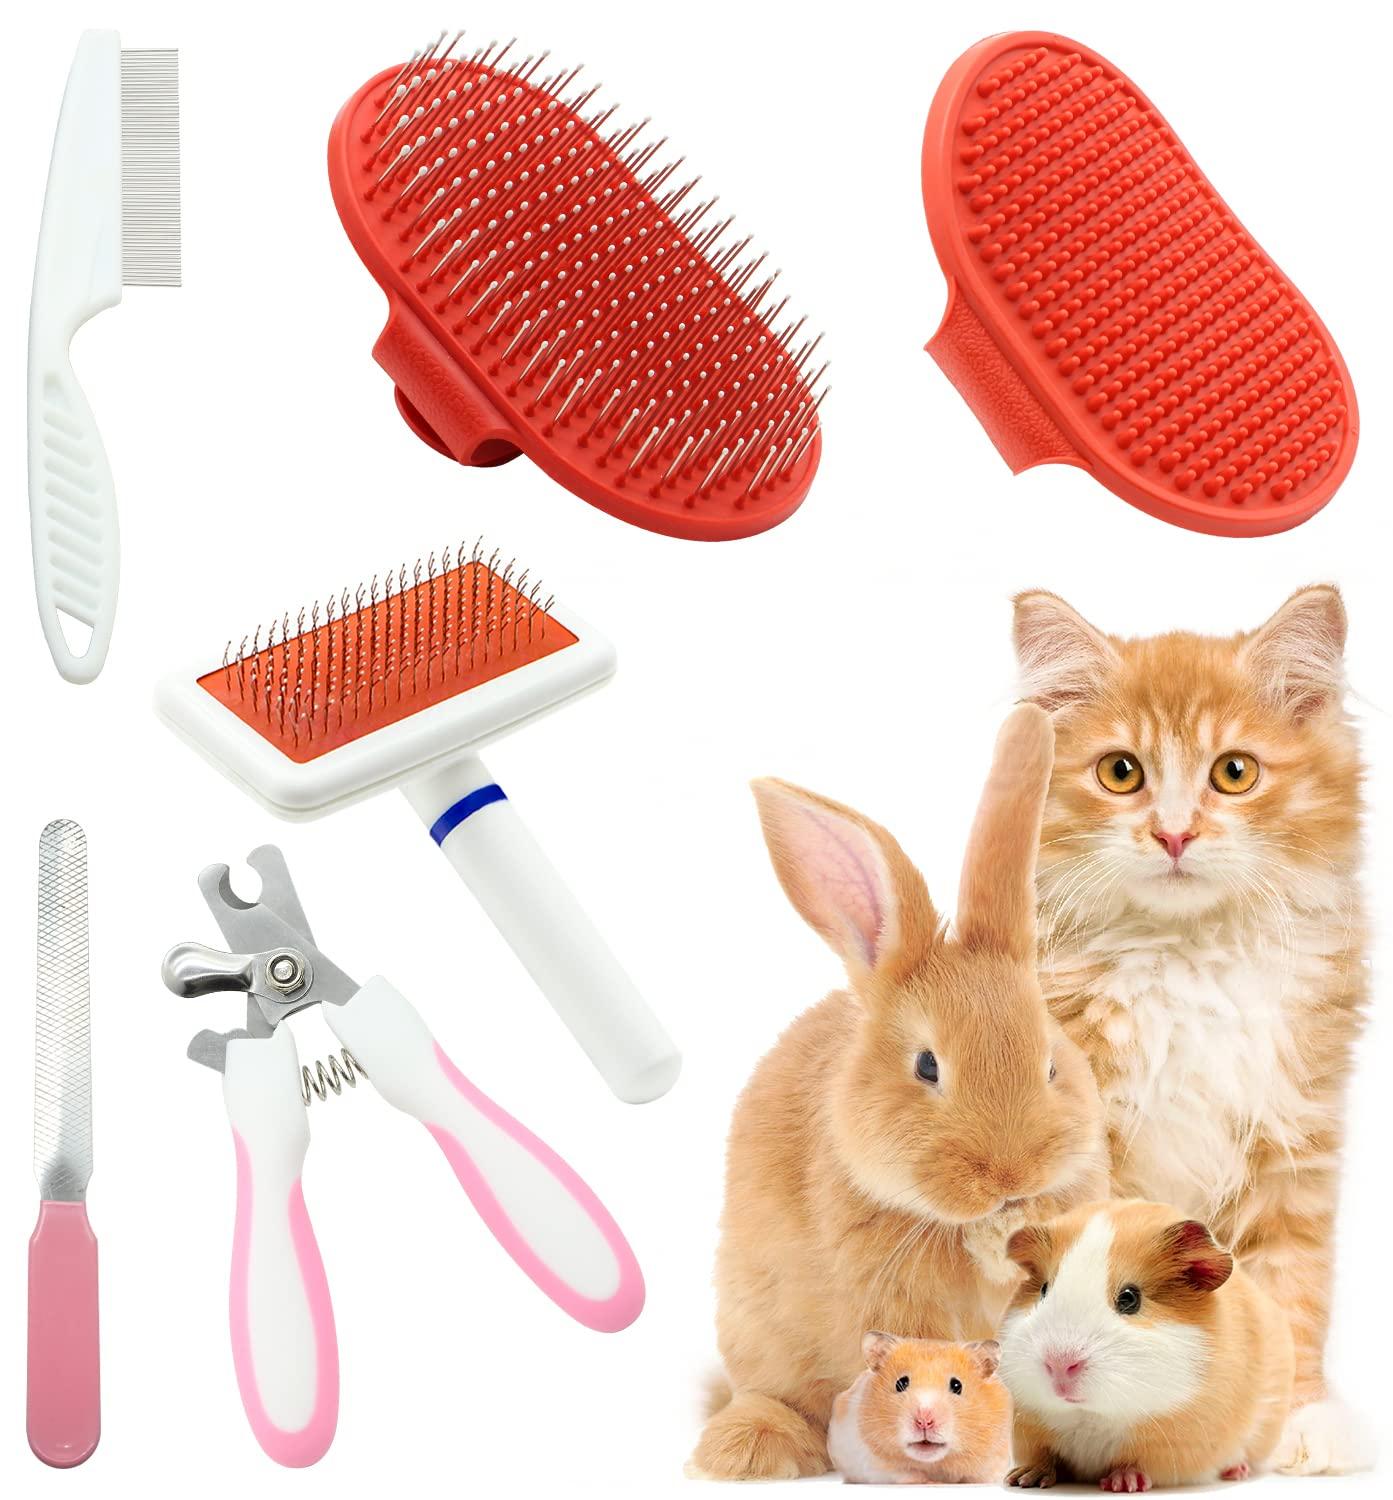 Rabbit Grooming Kit Set with Pet Shedding Slicker Brush Nail Clipper Trimmer Pet Massage Bath Glove Flea Comb for Bunny Puppy Kitten Guinea Pig Chinchilla Ferret Small Animals (Red, Pink)